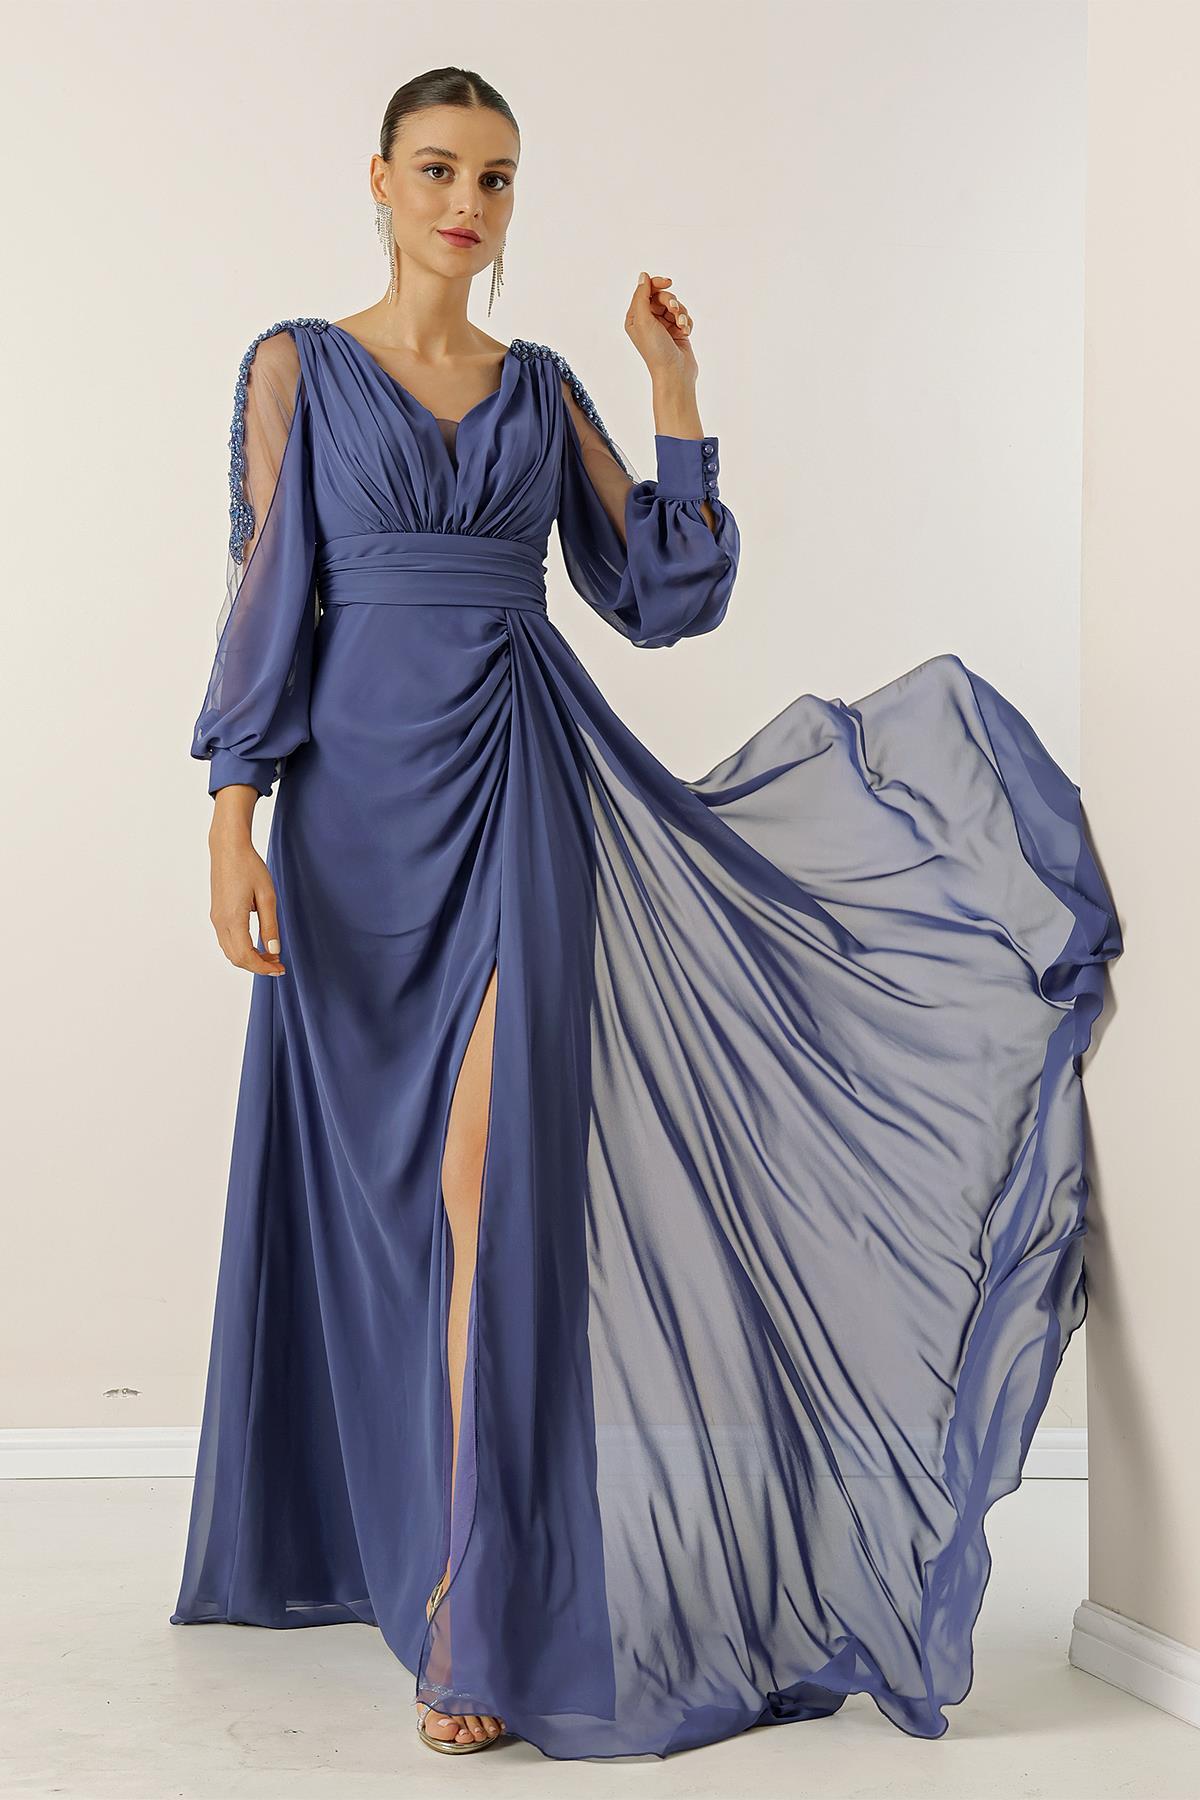 Levně By Saygı V-Neck Long Evening Chiffon Dress with Draping and Lined Sleeves.